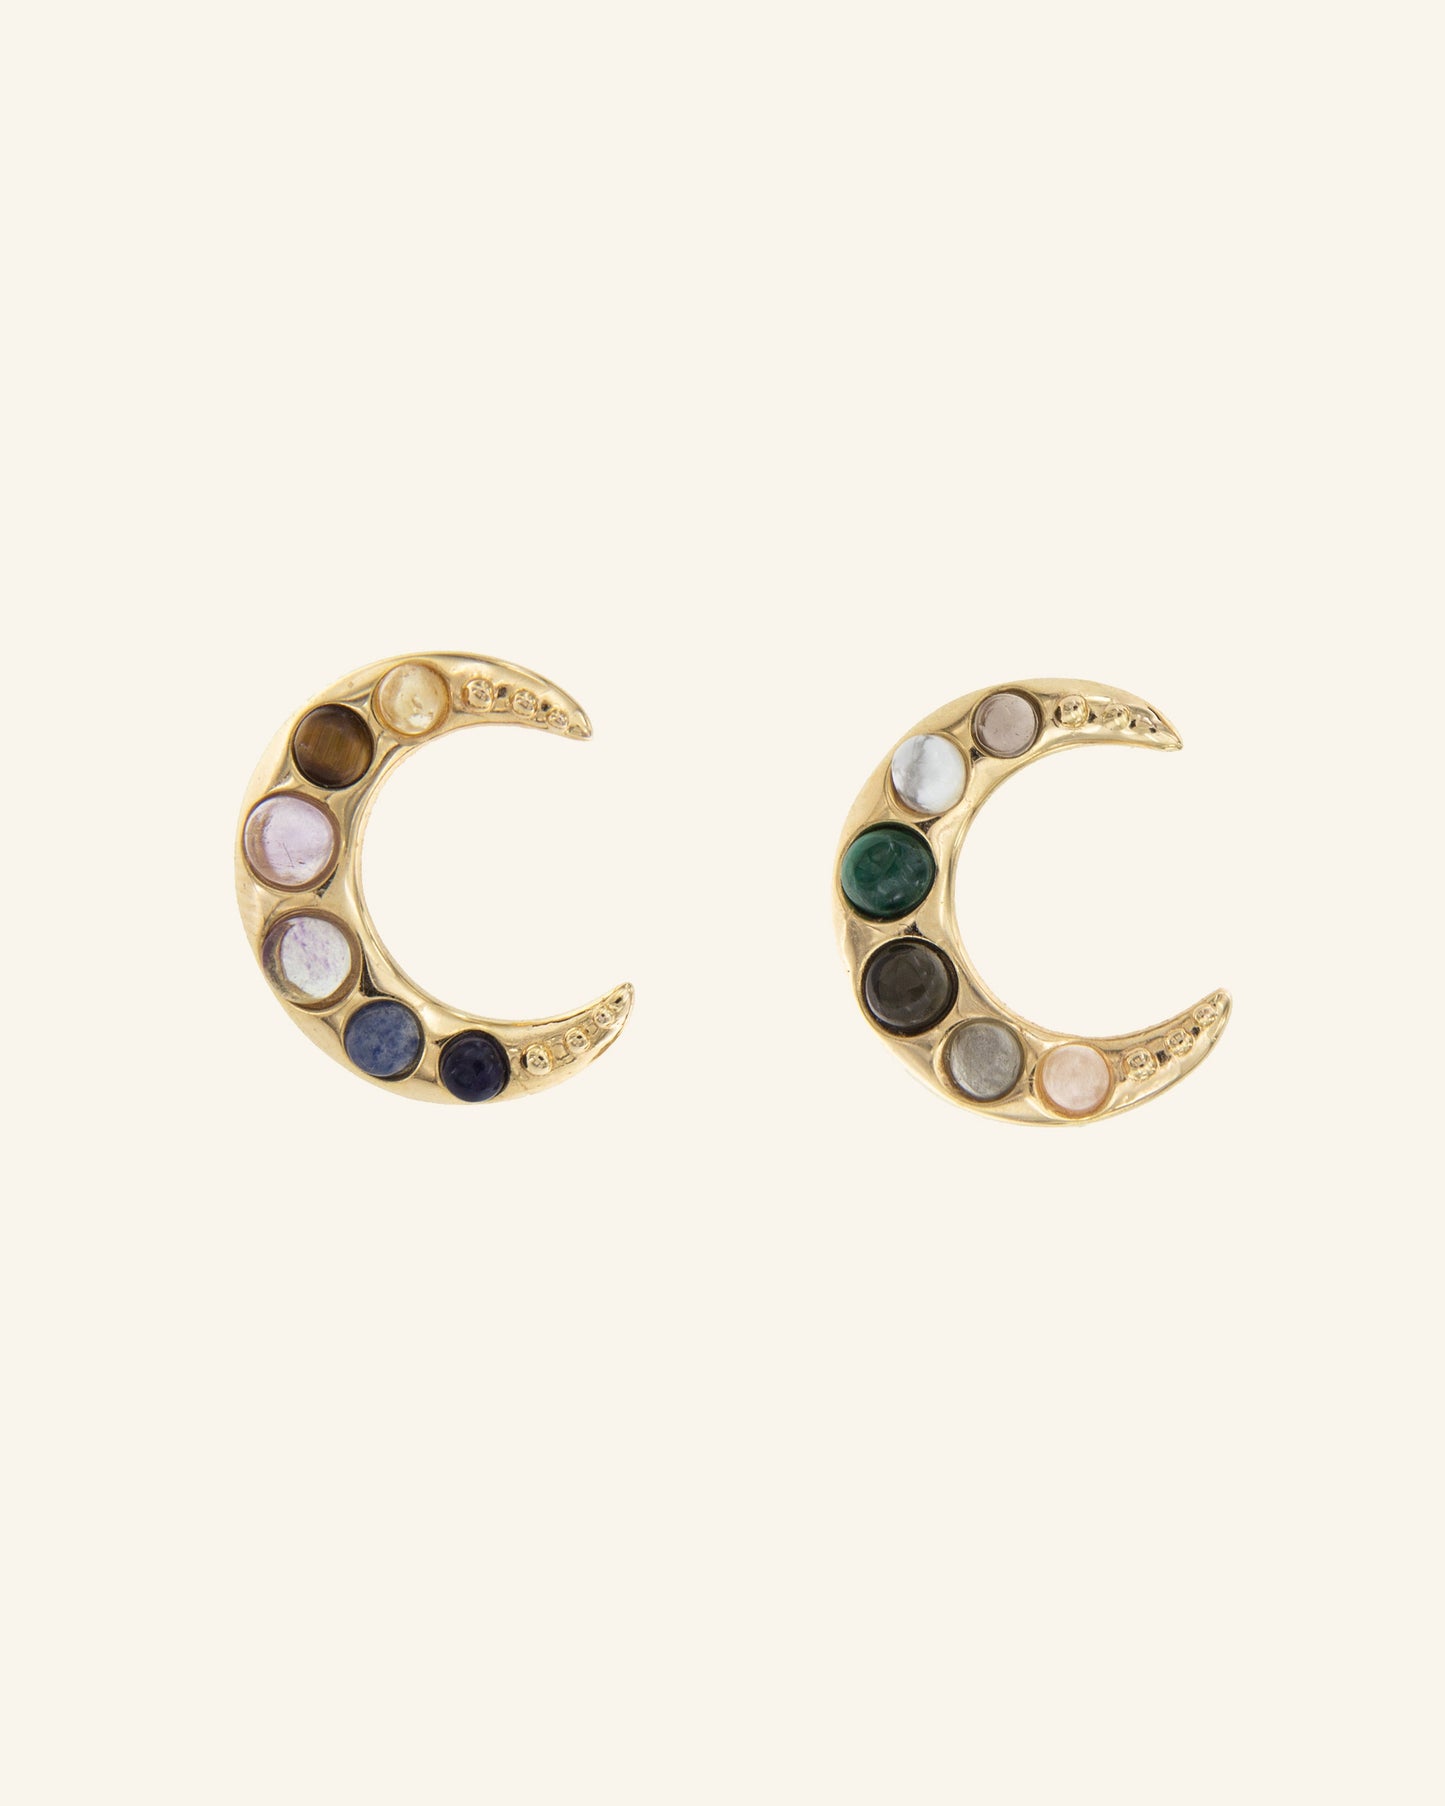 Moon earrings with combination of stones